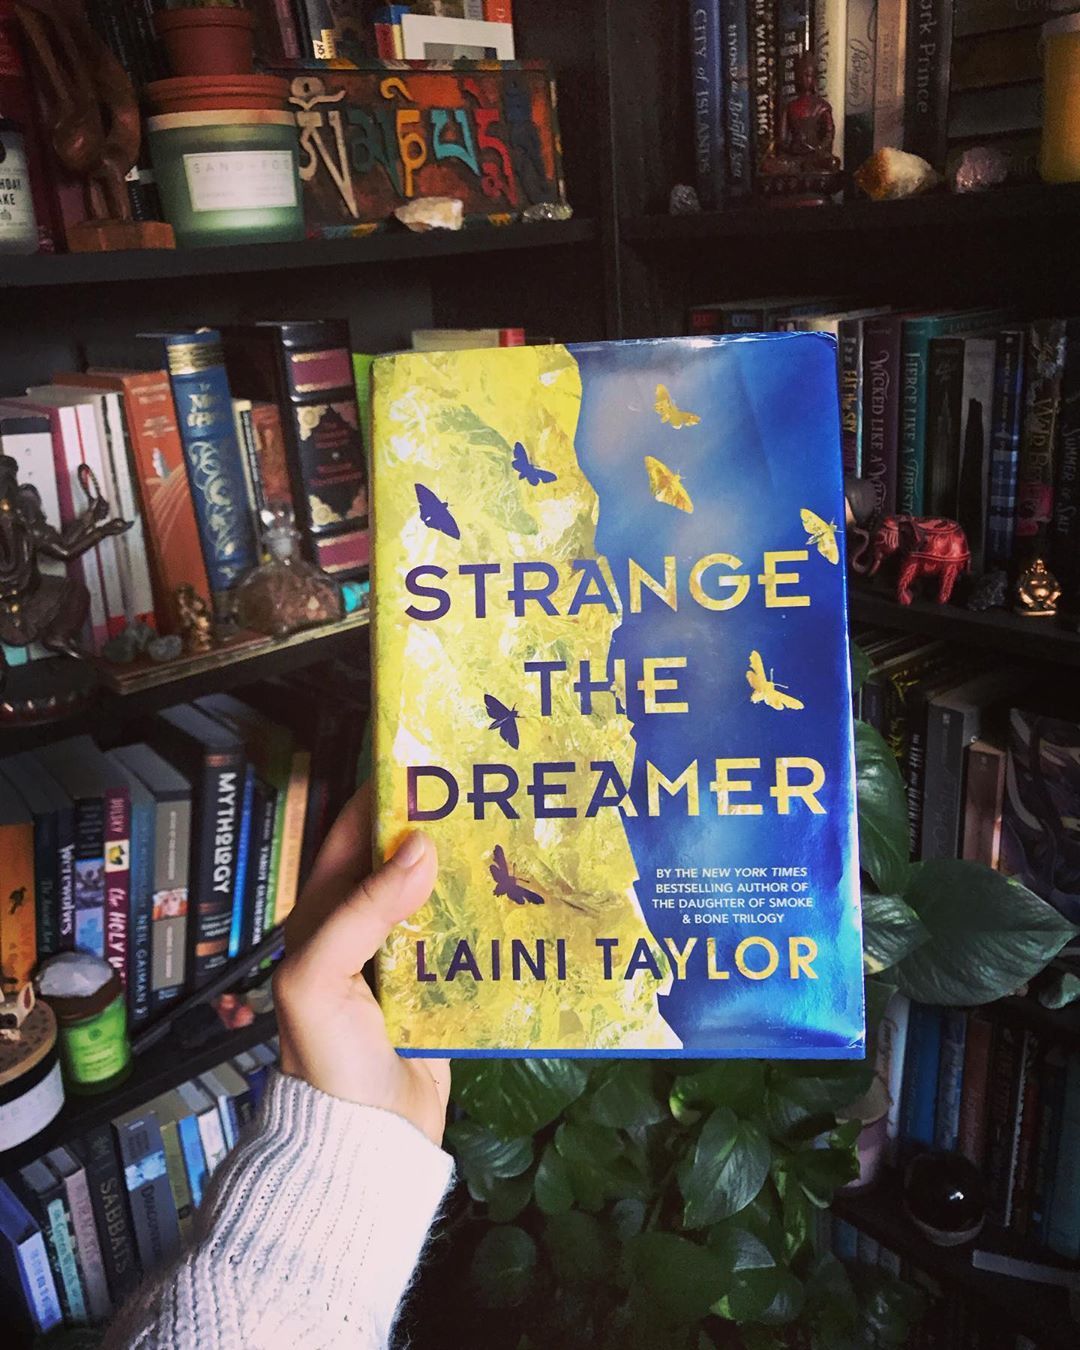 I think about Lazlo Strange so often, it hurts my heart a little. Is there a character that you’re just never going to let go of? . #maryreads #amreading #reading #readersofinstagram #books #booklover #bookish #bookreview #bookstagram...